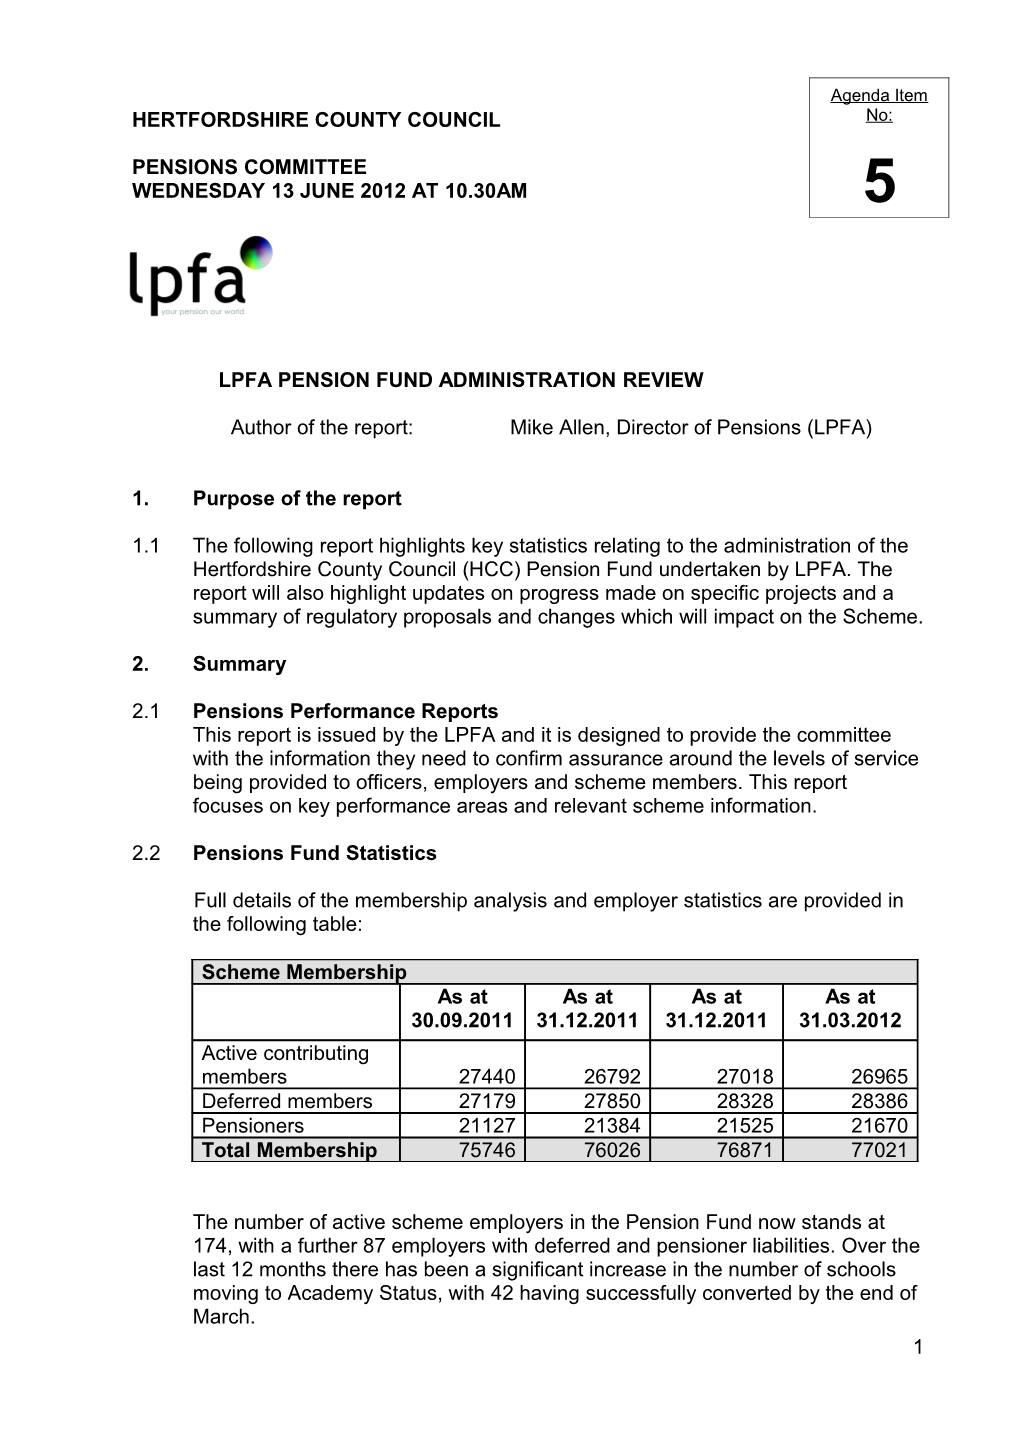 Pensions Committee Wednesday 13 June 2012 at 10.30Am Item 5 - LPFA Pension Fund Administration